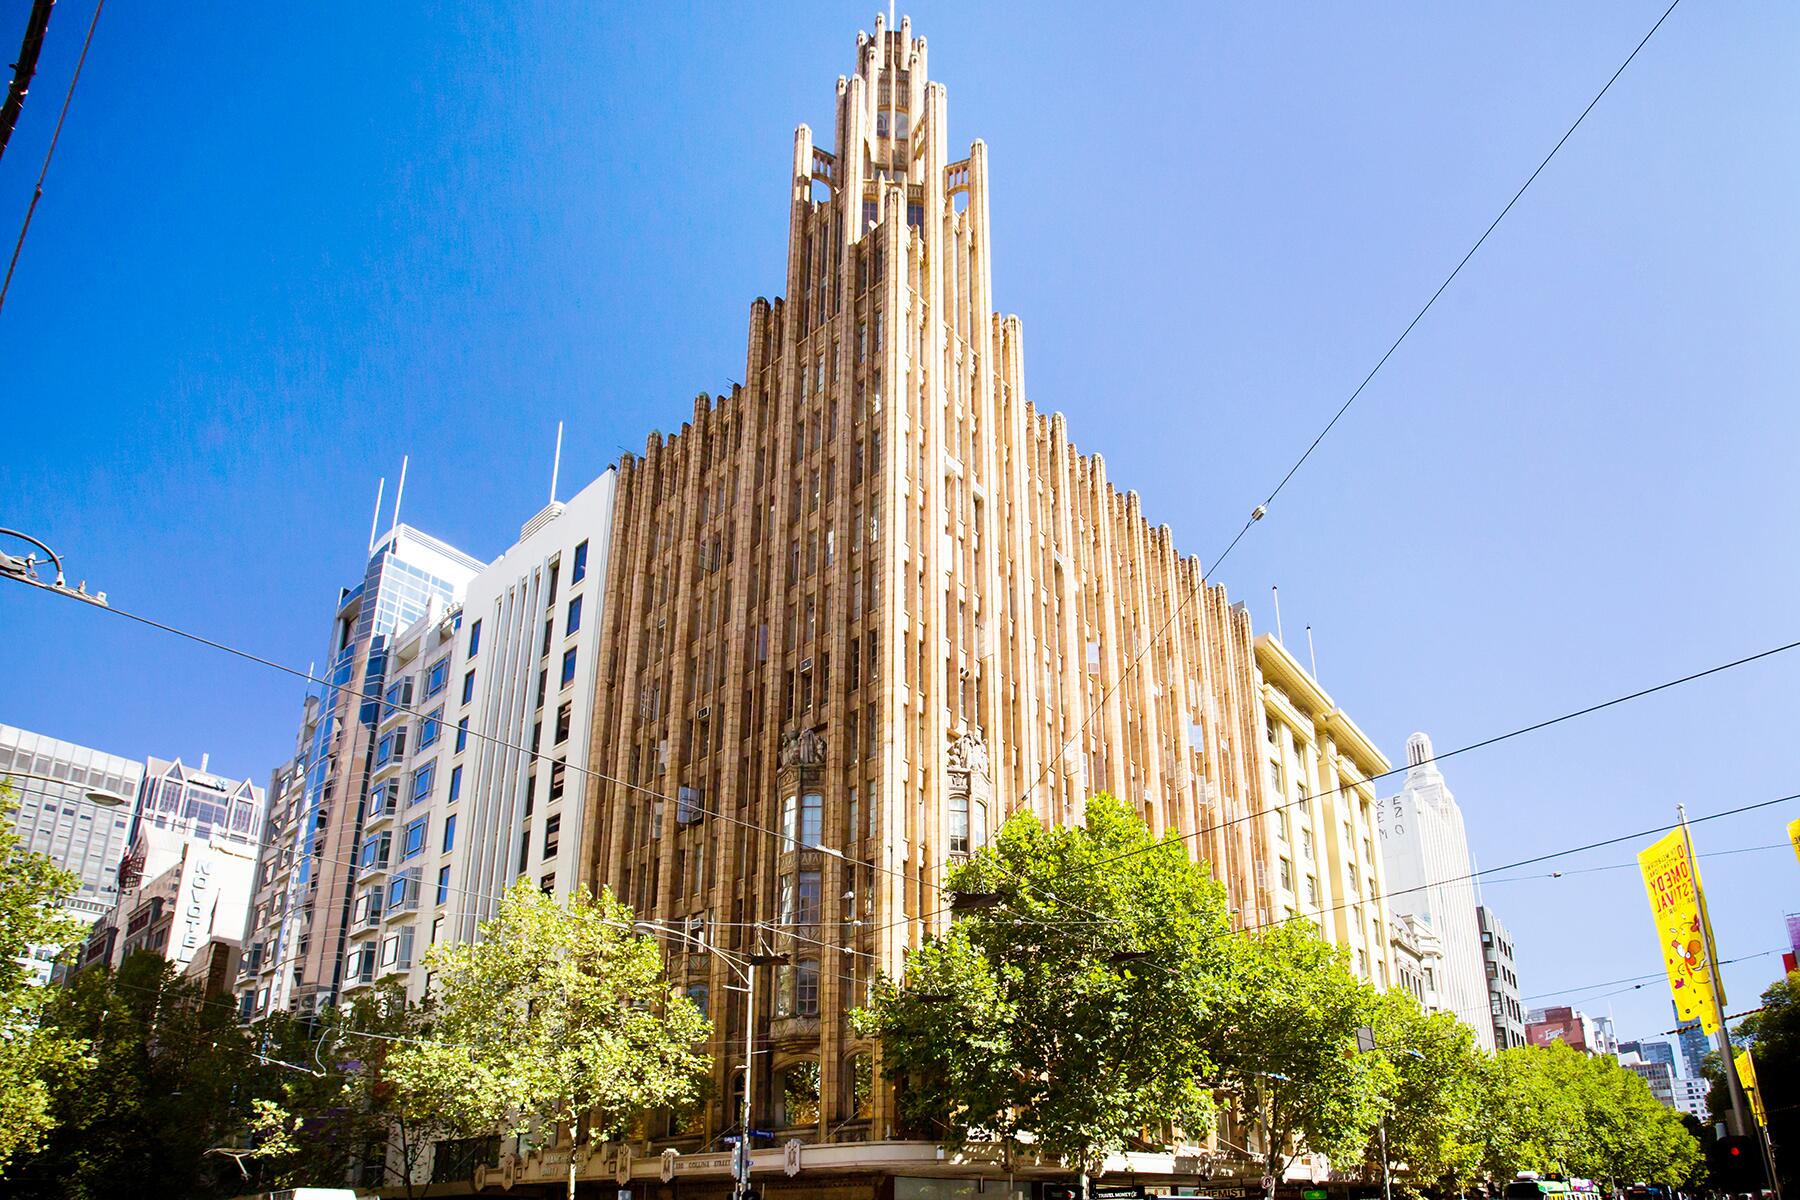 The 10 Most Beautiful Art Deco Style Structures In The World